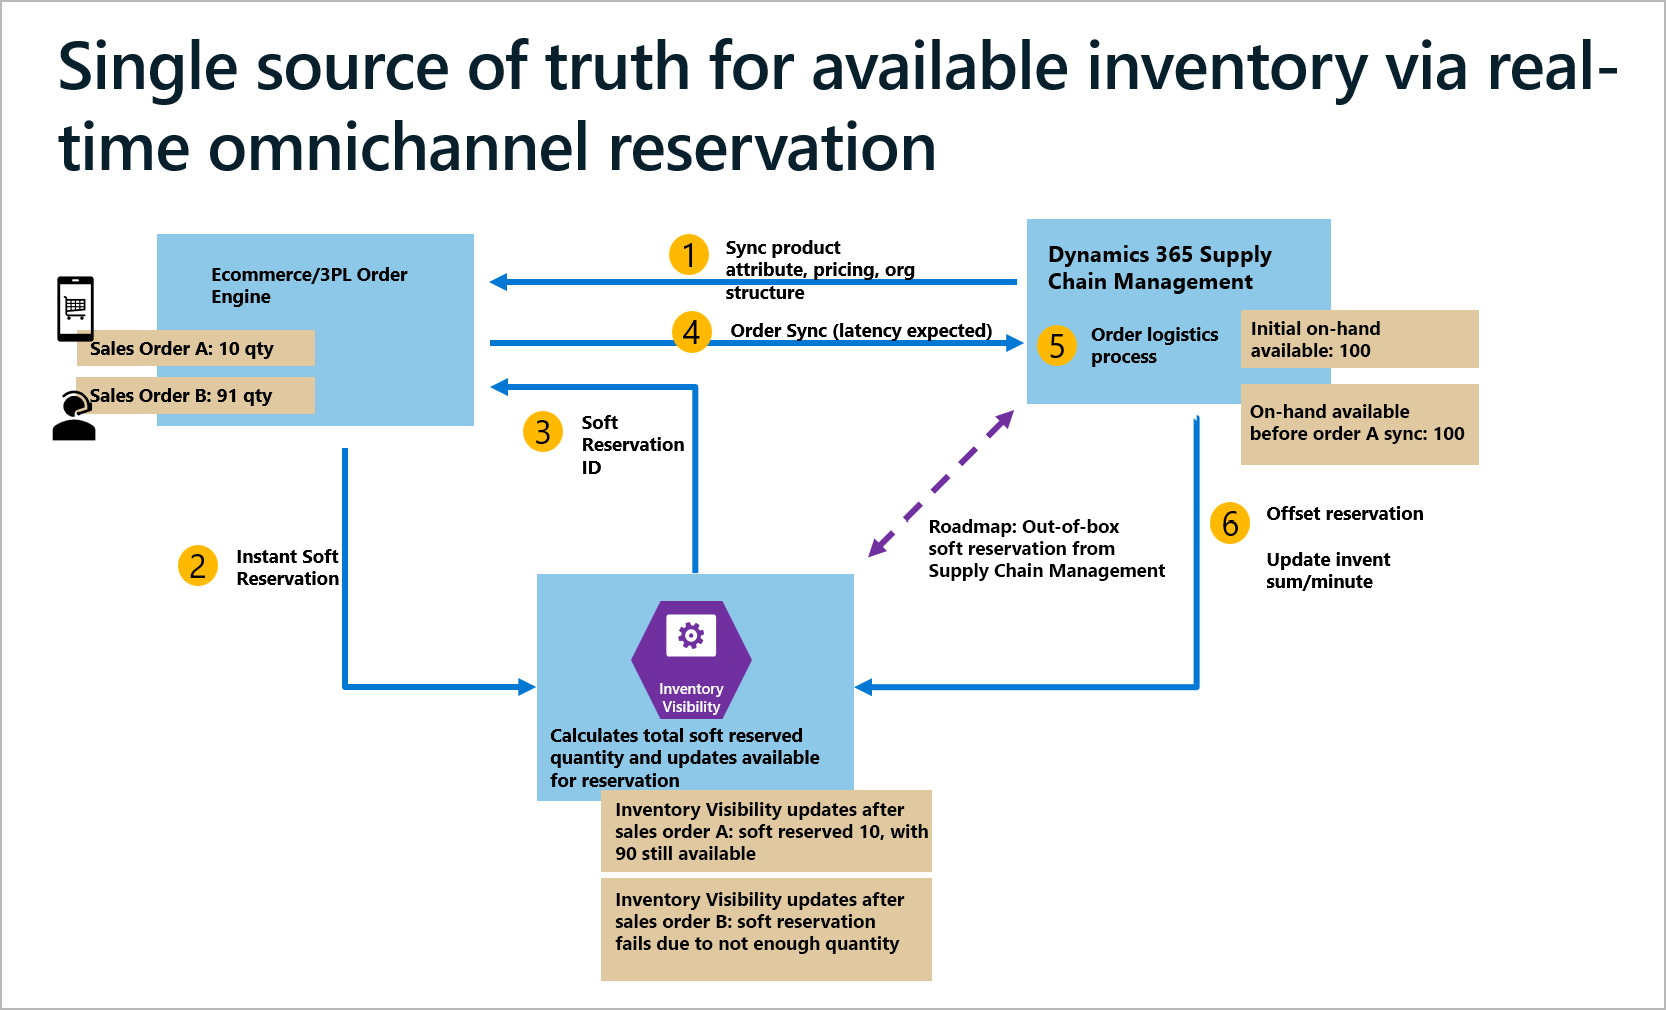 Réservations Inventory Visibility - Supply Chain Management | Dynamics 365  | Microsoft Learn